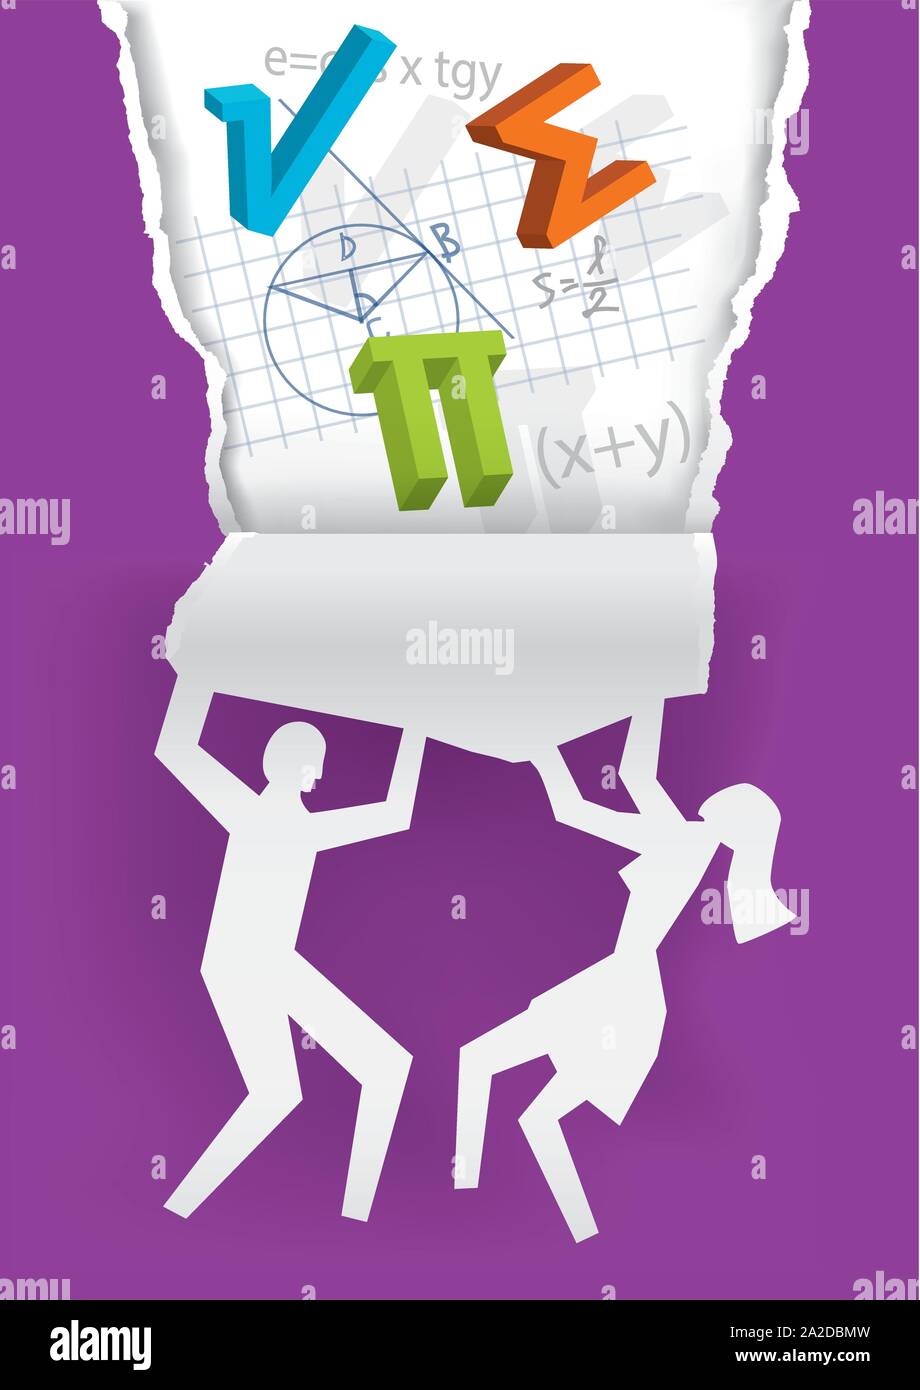 Discover Mathematics, education concept,torn paper. Male an fwmale silhouette ripping violet paper with mathematical formulas and symbols. Vector avai Stock Vector